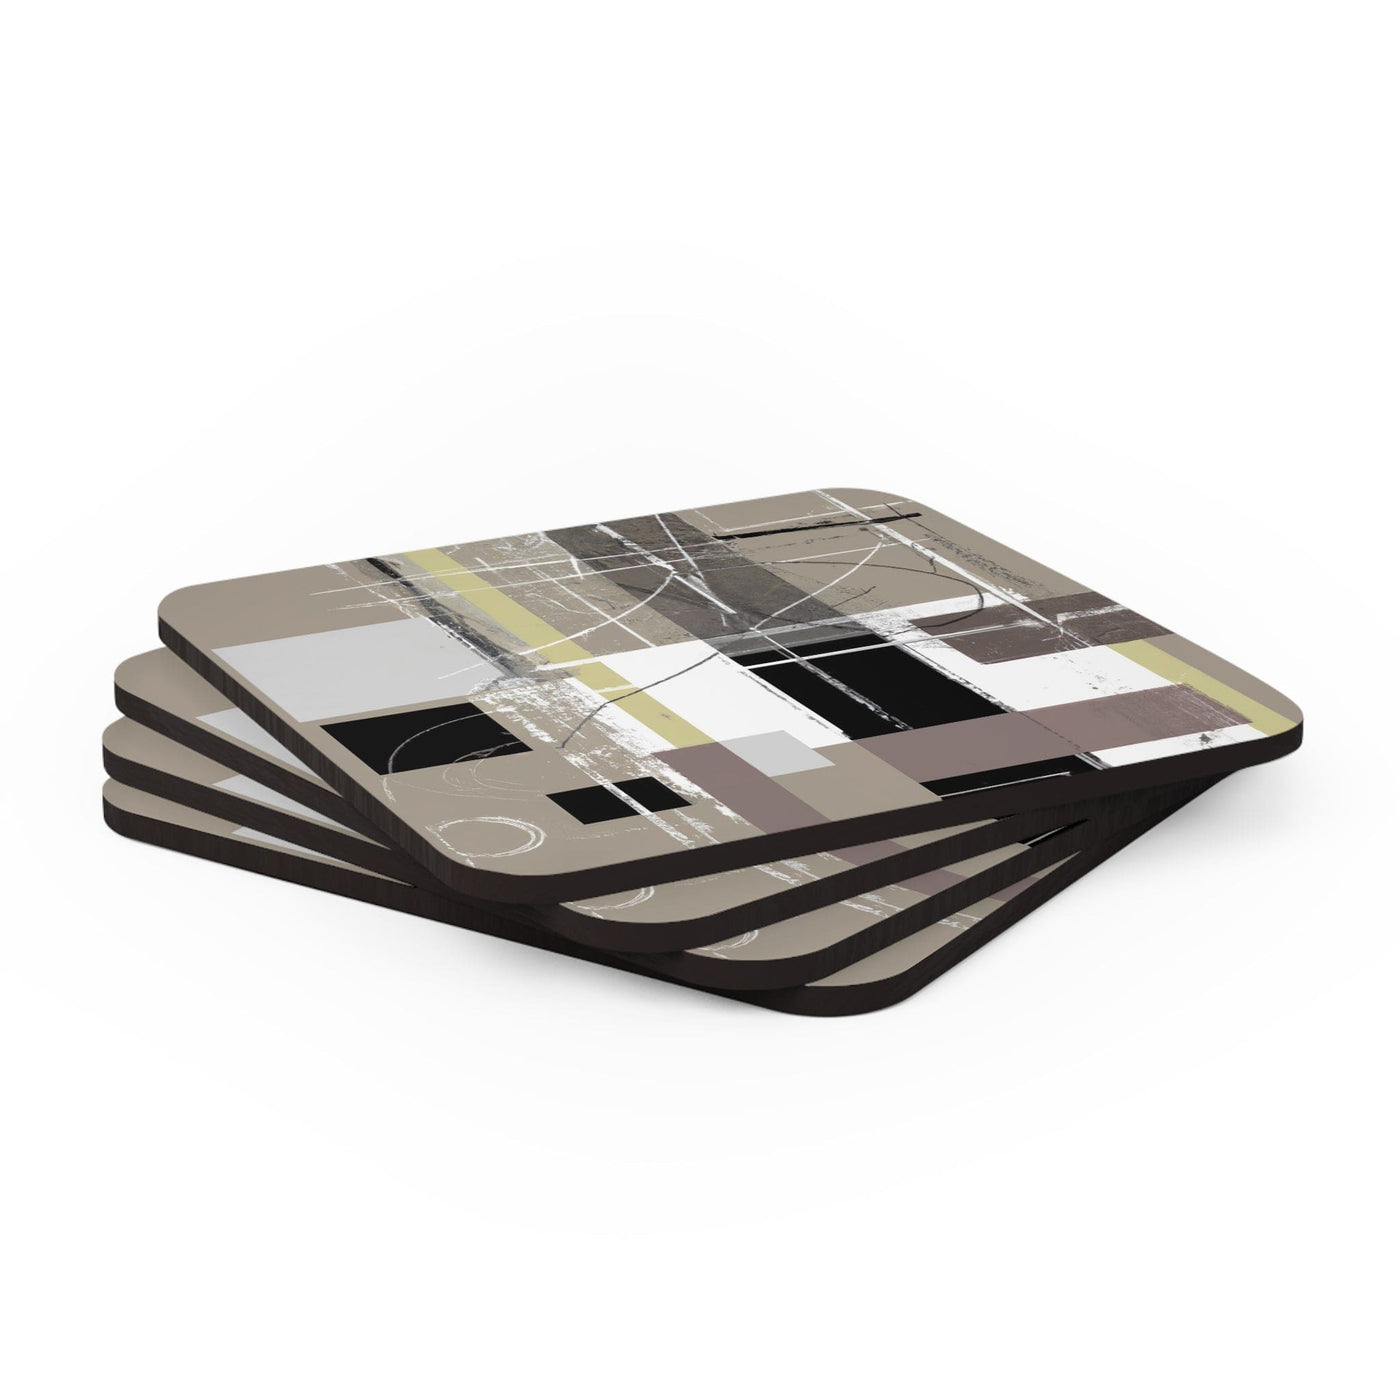 Handcrafted Square Coaster Set Of 4 For Drinks And Cups Abstract Brown